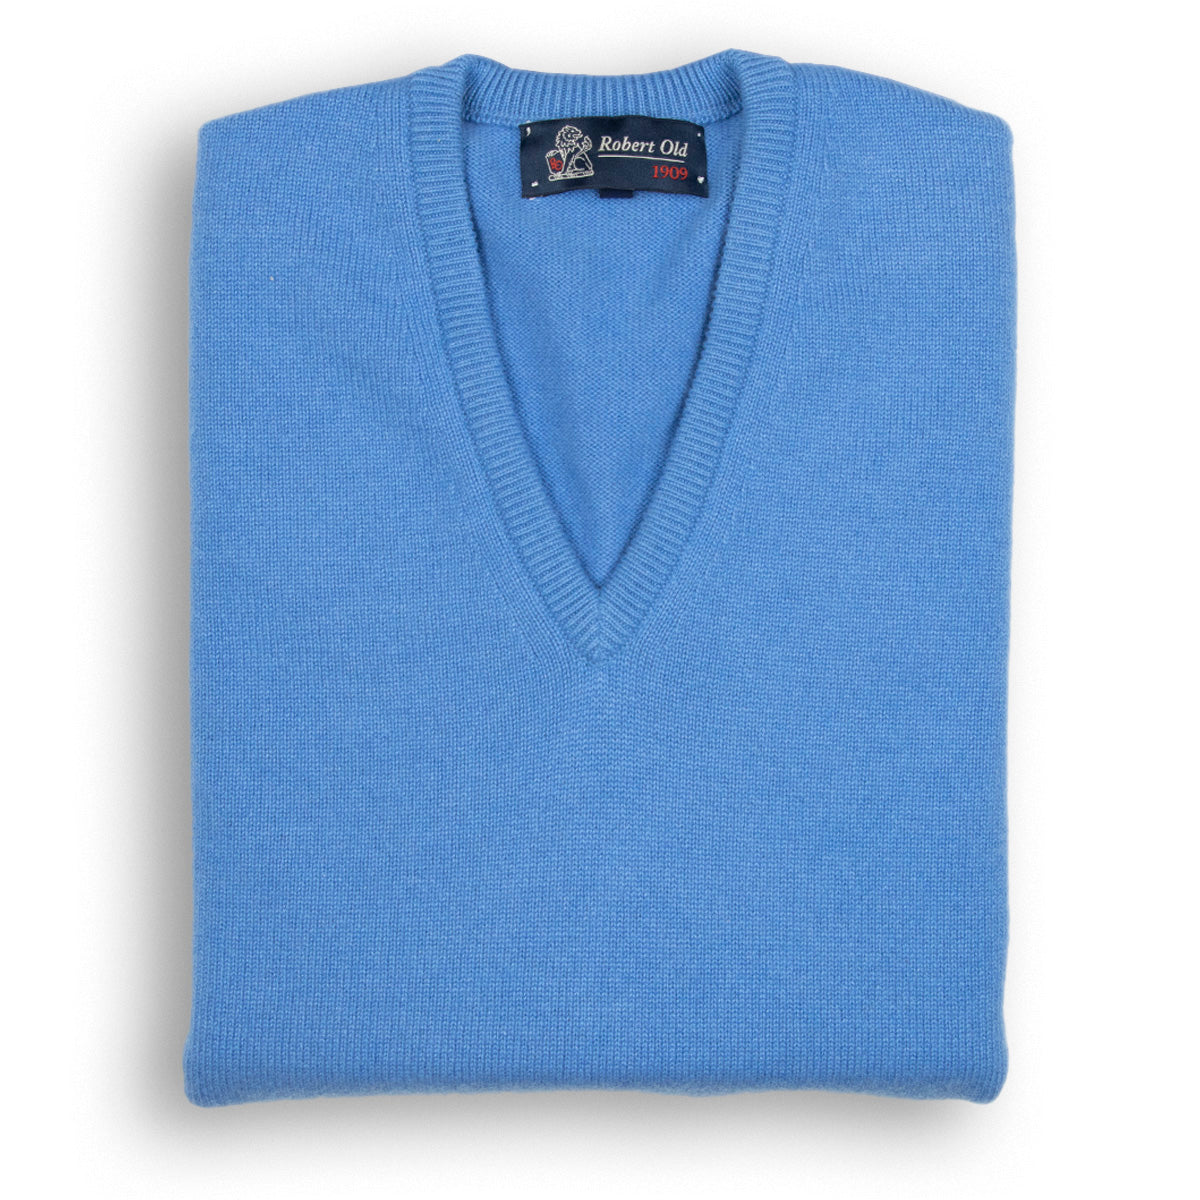 Isfahan Blue Tobermorey 4ply V-Neck Cashmere Sweater  Robert Old Isfahan Blue UK 40" 